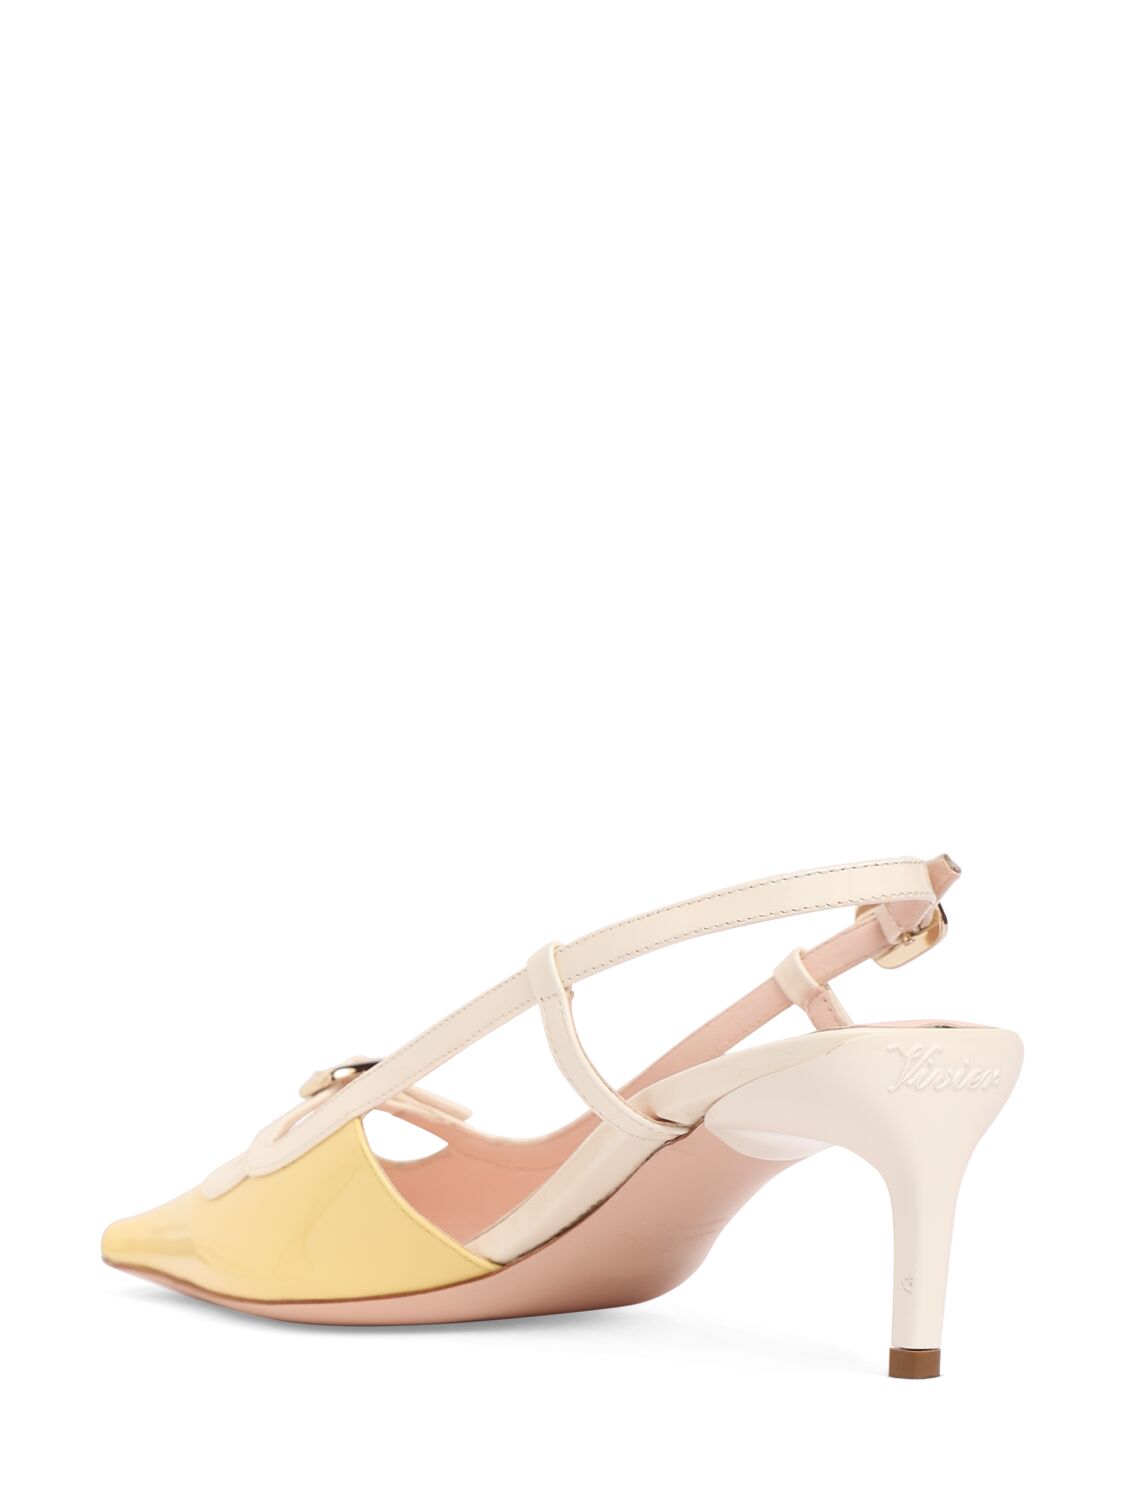 Shop Roger Vivier 55mm Mini Buckle Patent Leather Pumps In Yellow,offwhite